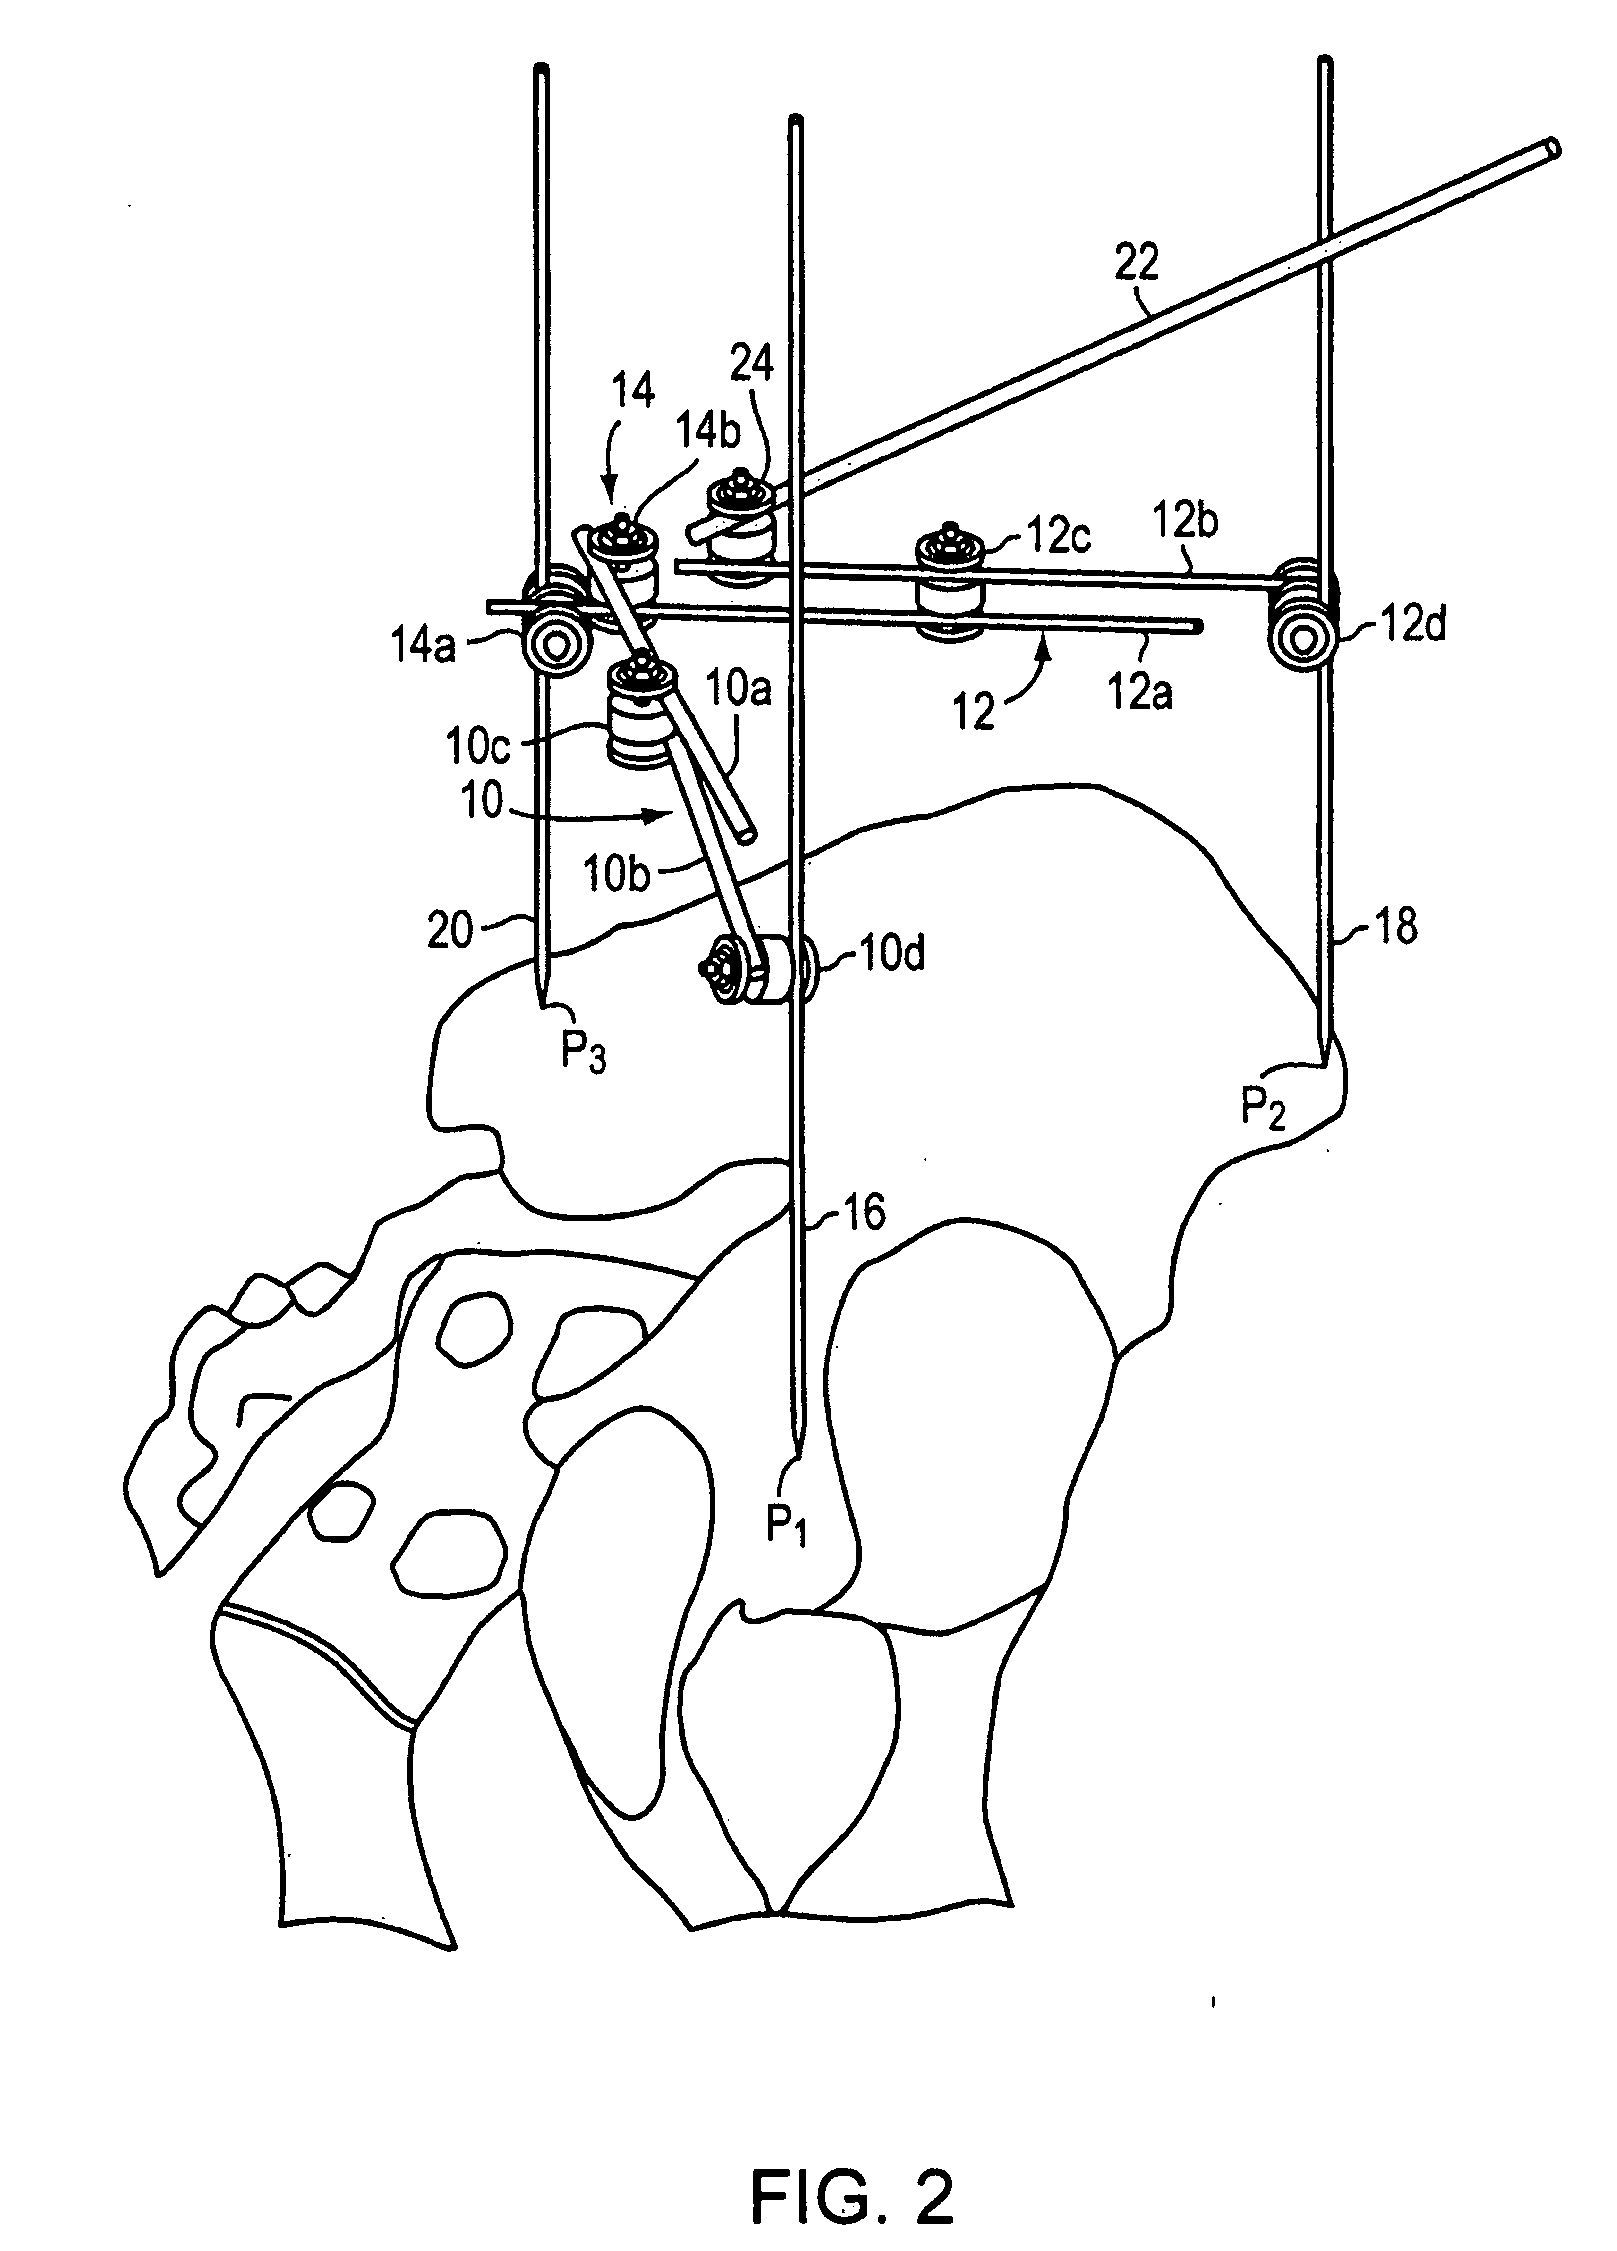 Method and apparatus for determining acetabular component positioning